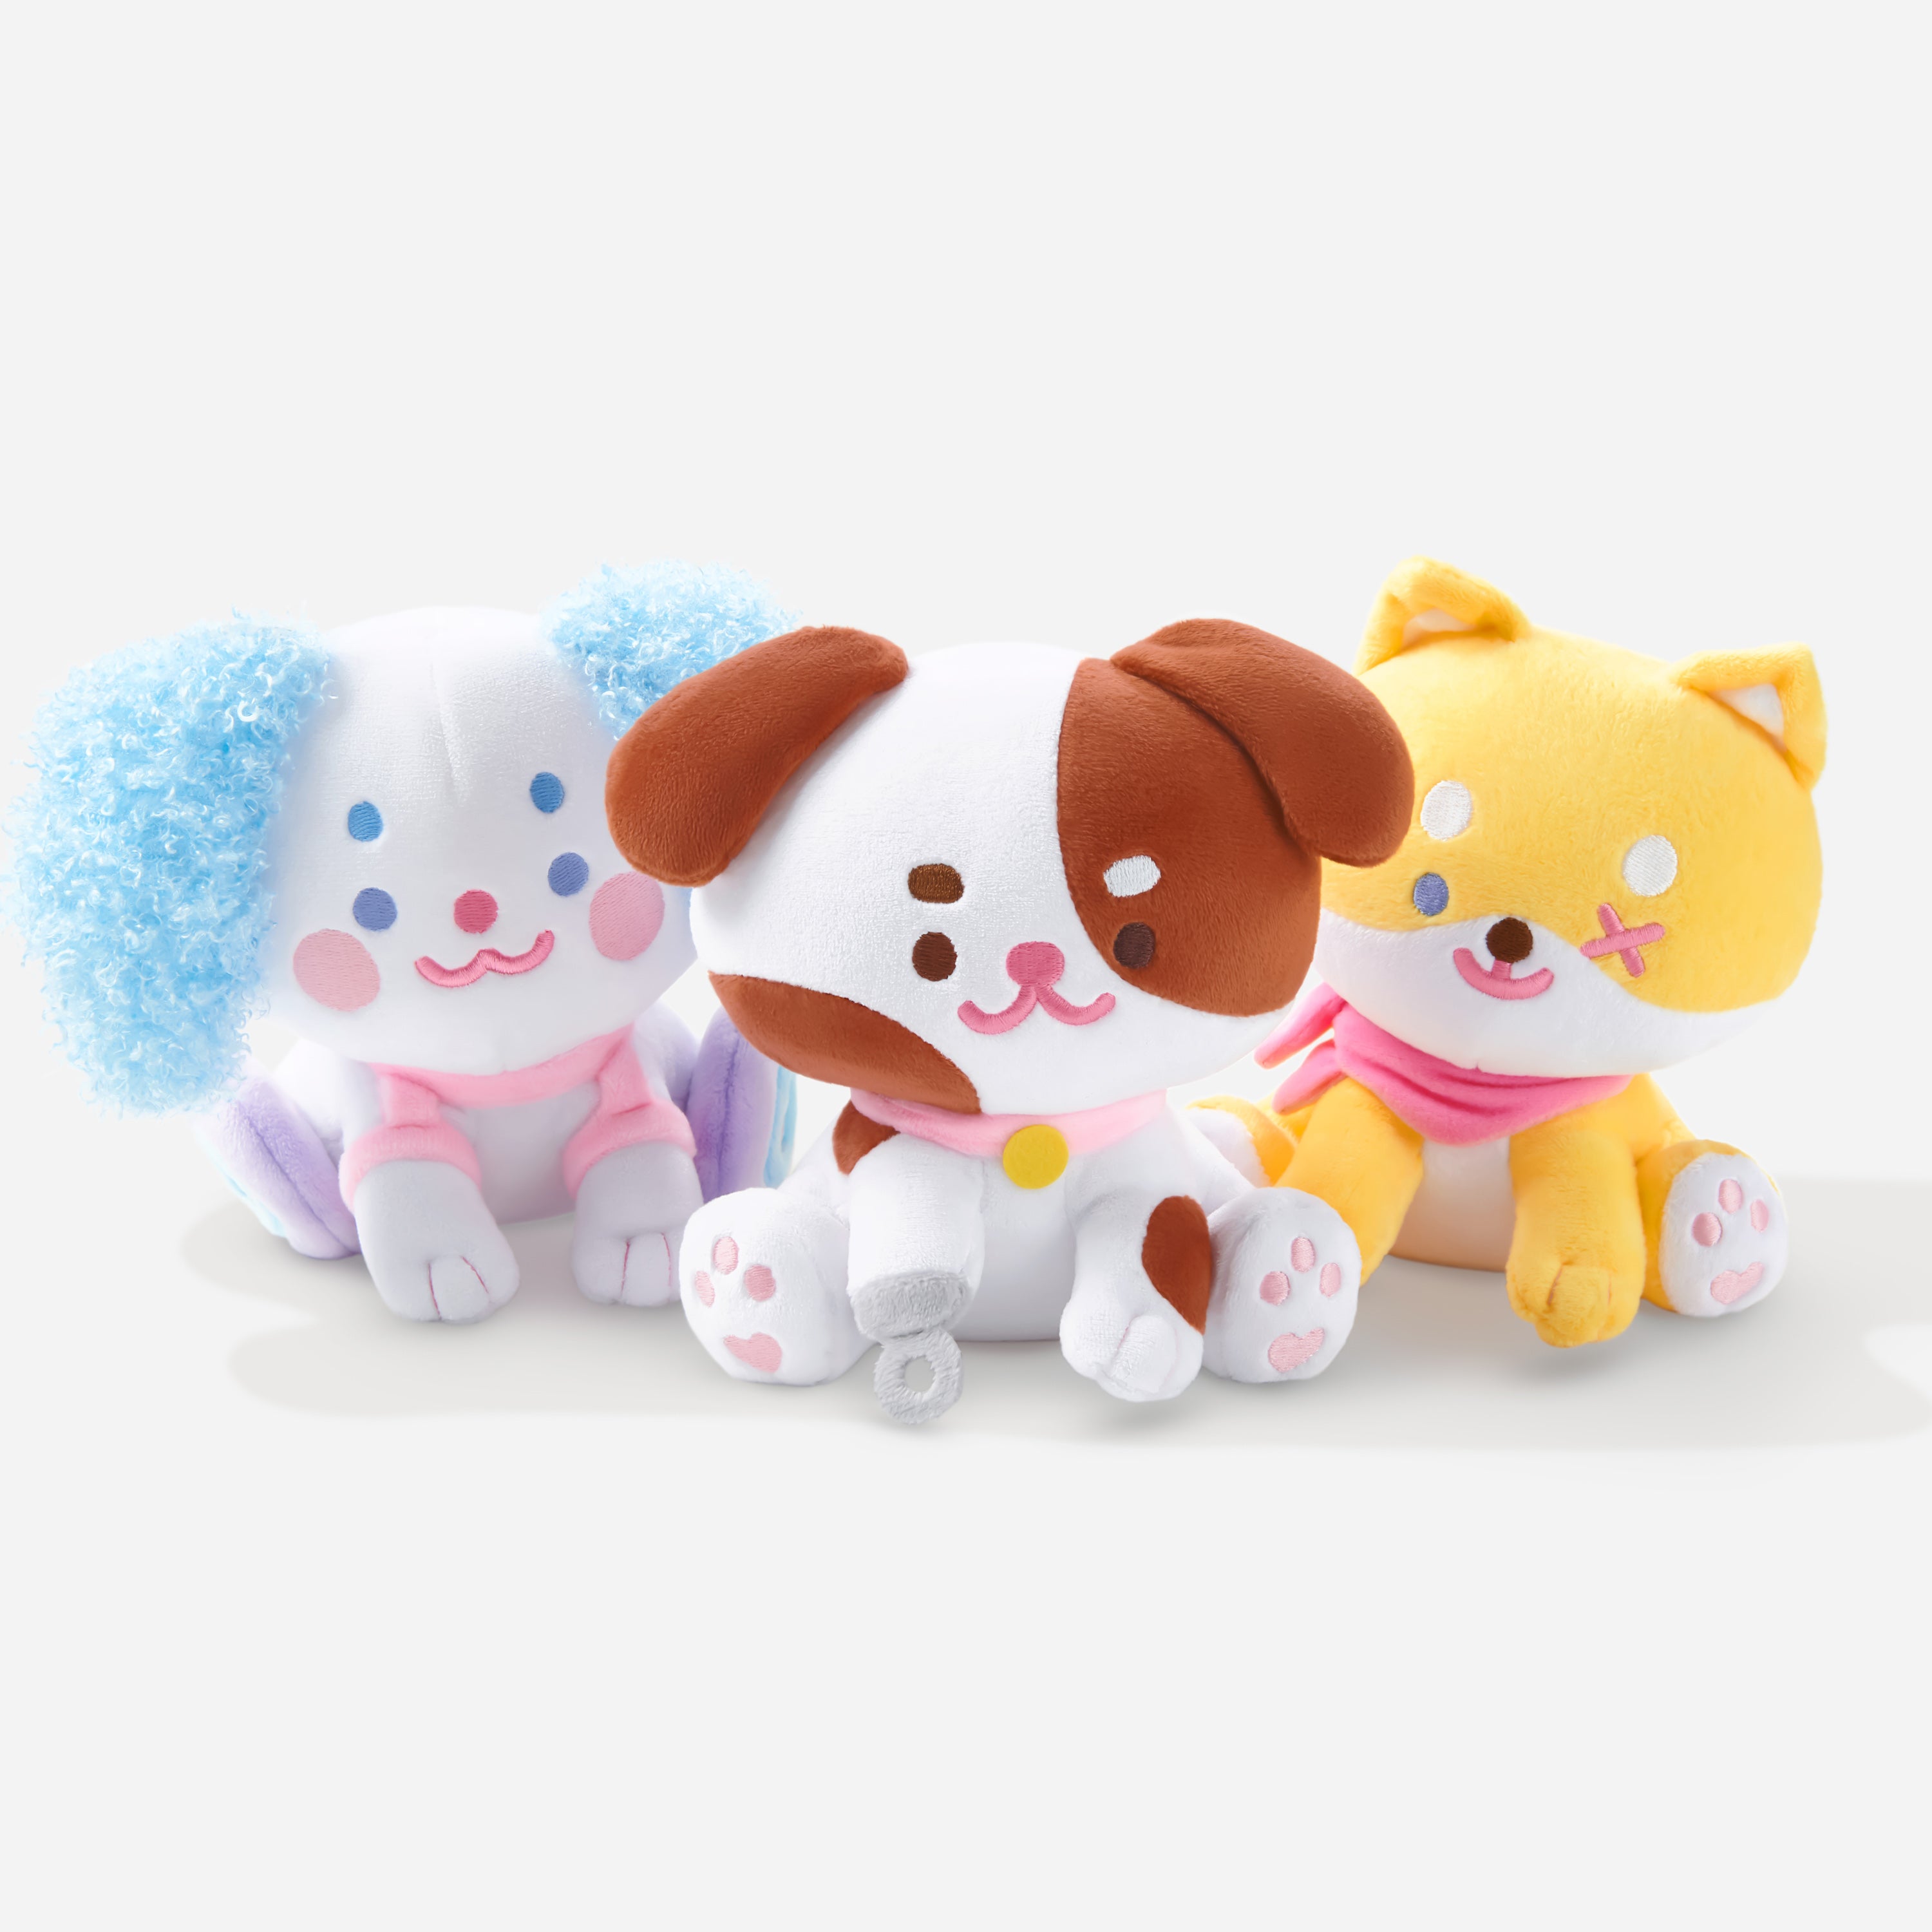 Power Puppies - plushies that celebrate disability